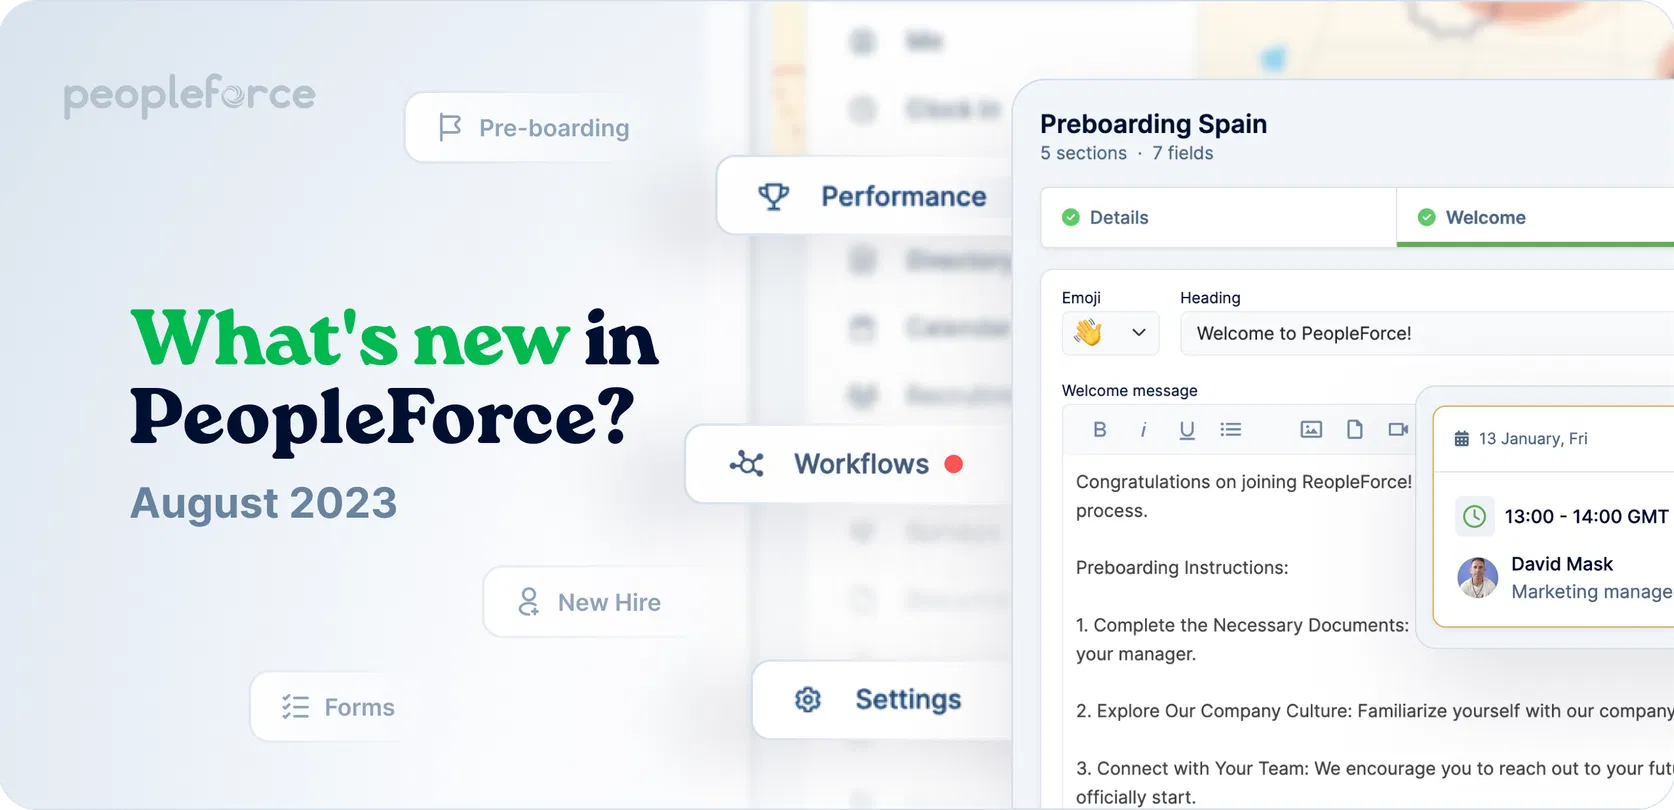 Pre-boarding and new hire forms, performance review and security settings improvements